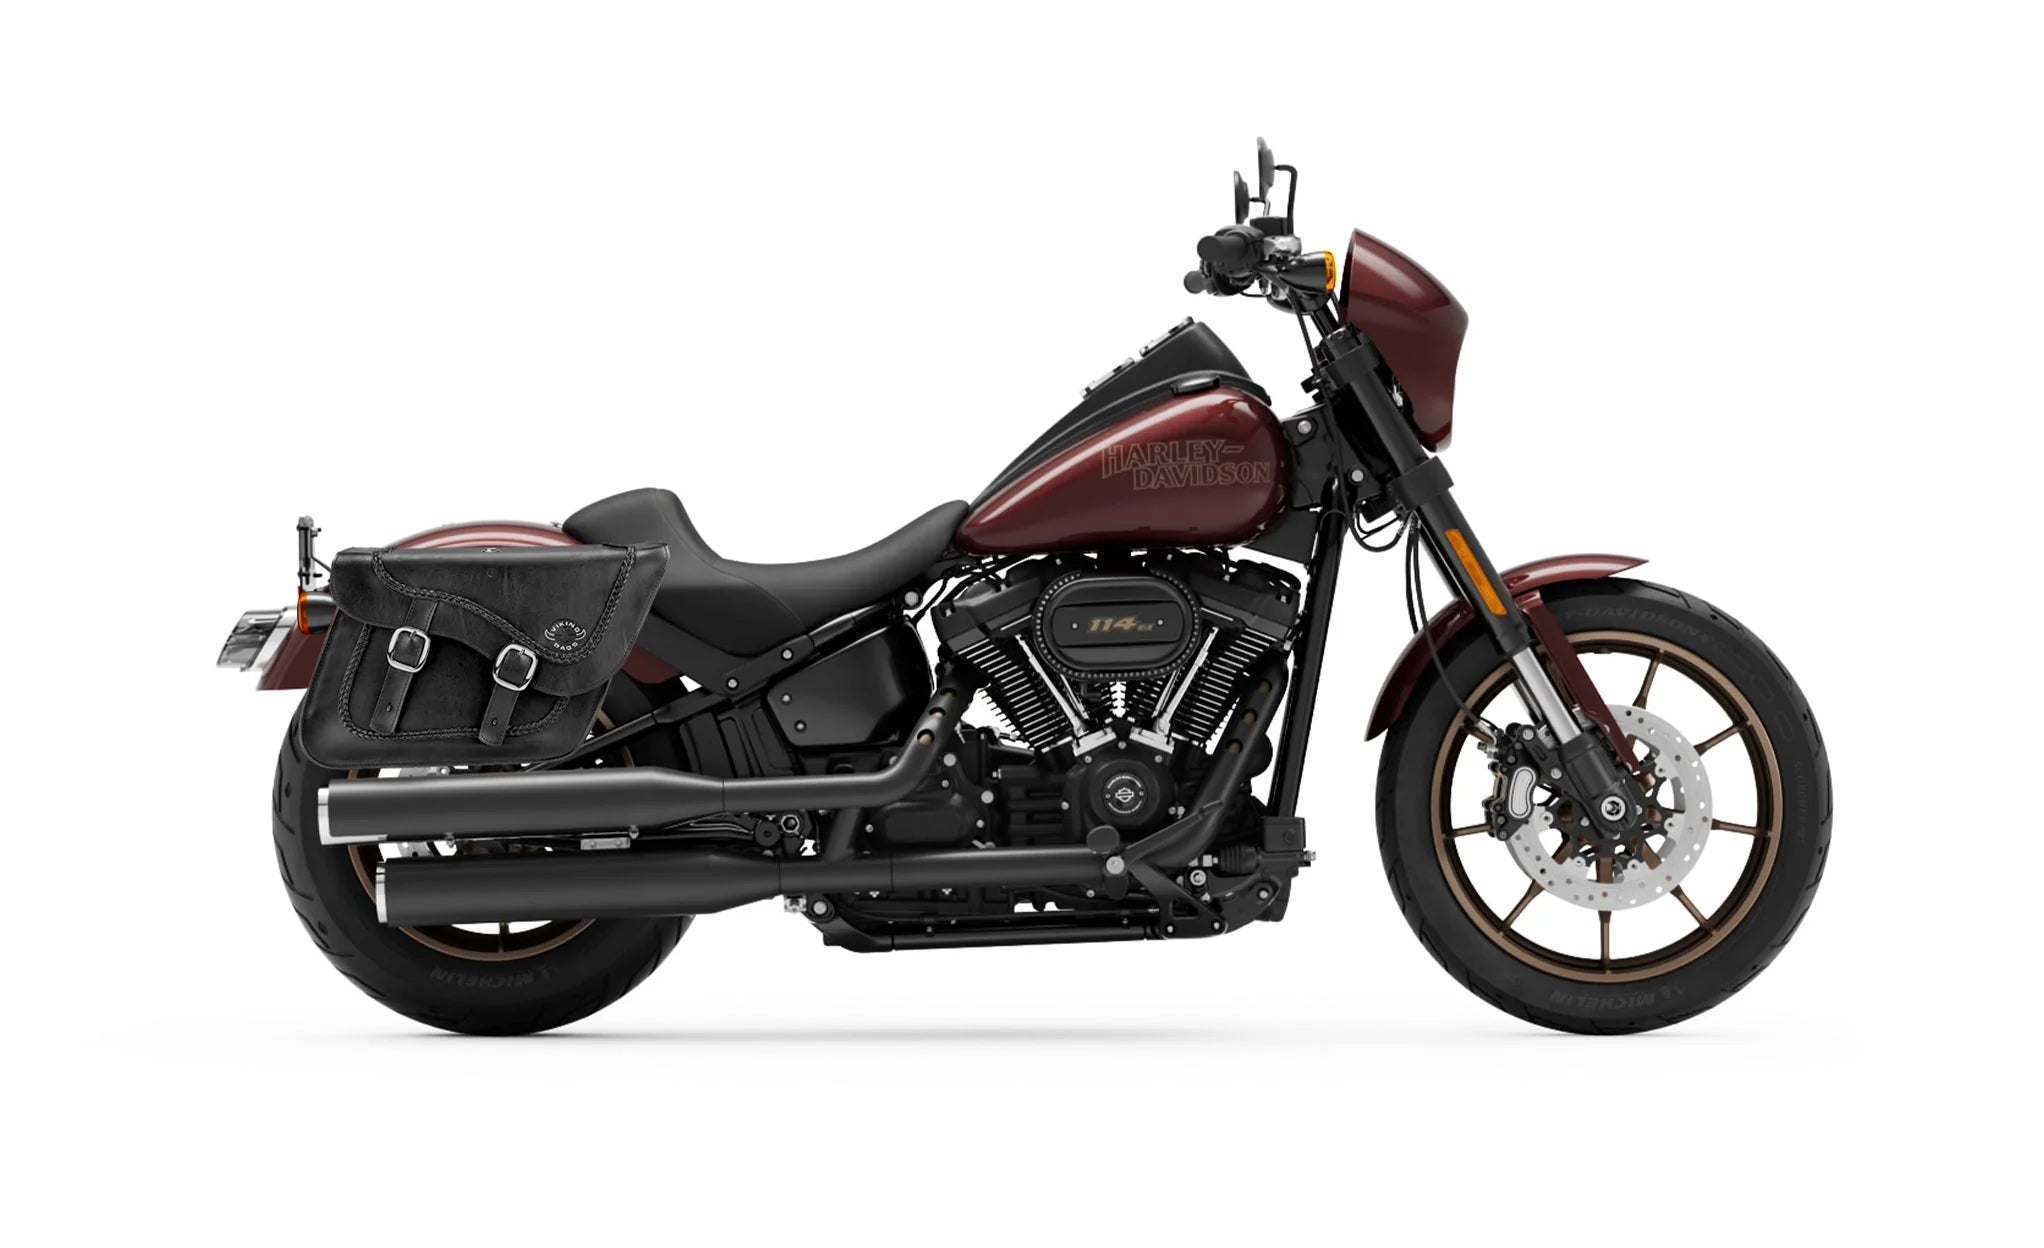 Viking Americano Braided Large Leather Motorcycle Saddlebags For Harley Softail Low Rider S Fxlrs on Bike Photo @expand